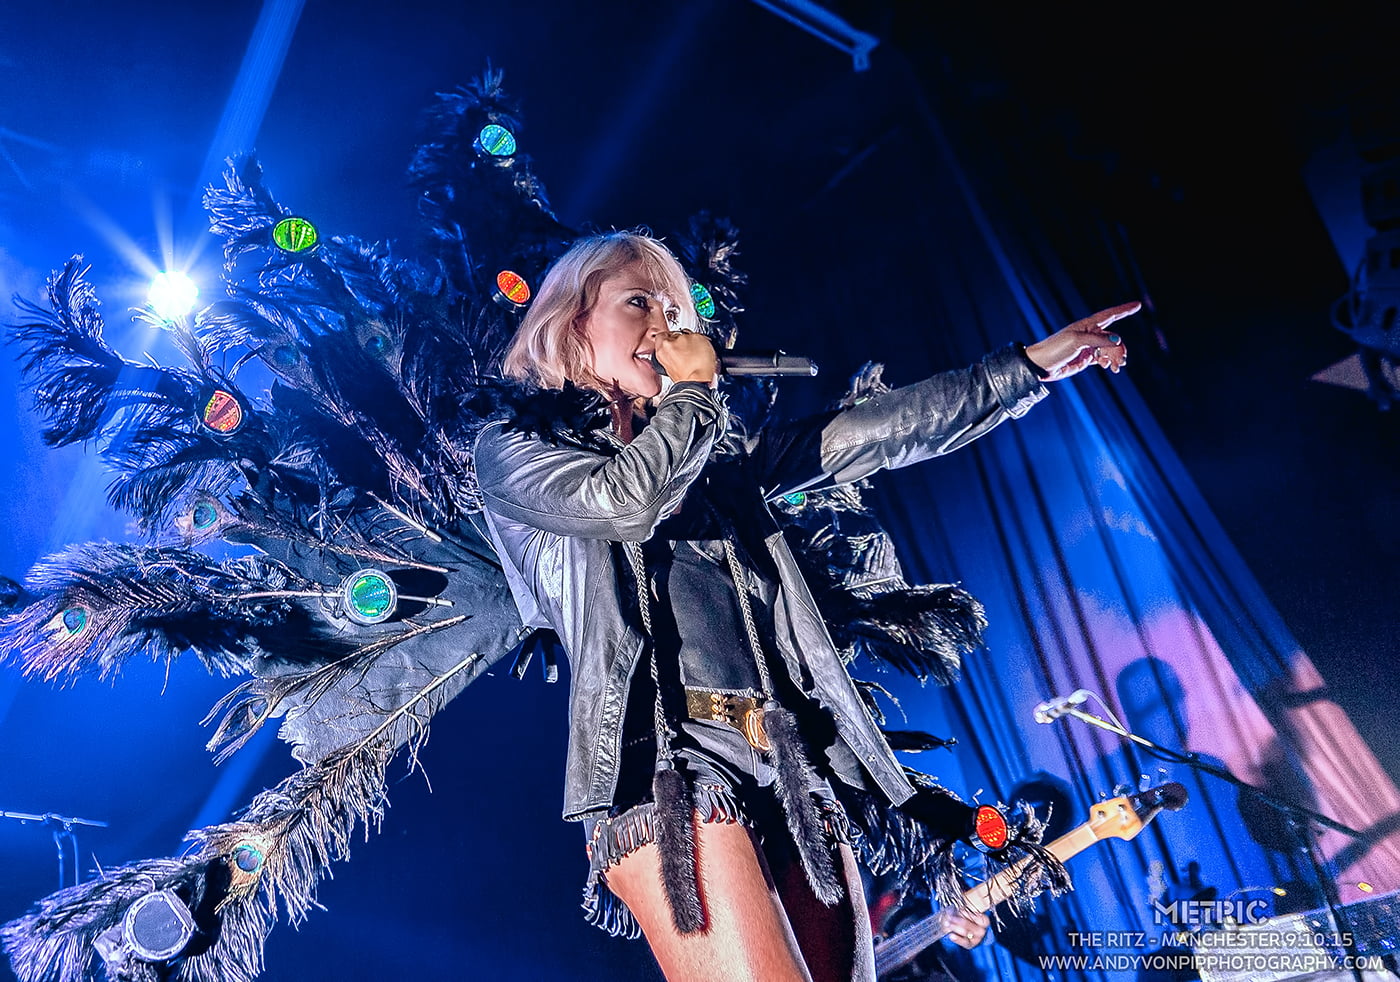 The VPME | IN PICTURES :  METRIC - LIVE - MANCHESTER RITZ - 09.10.2015 2